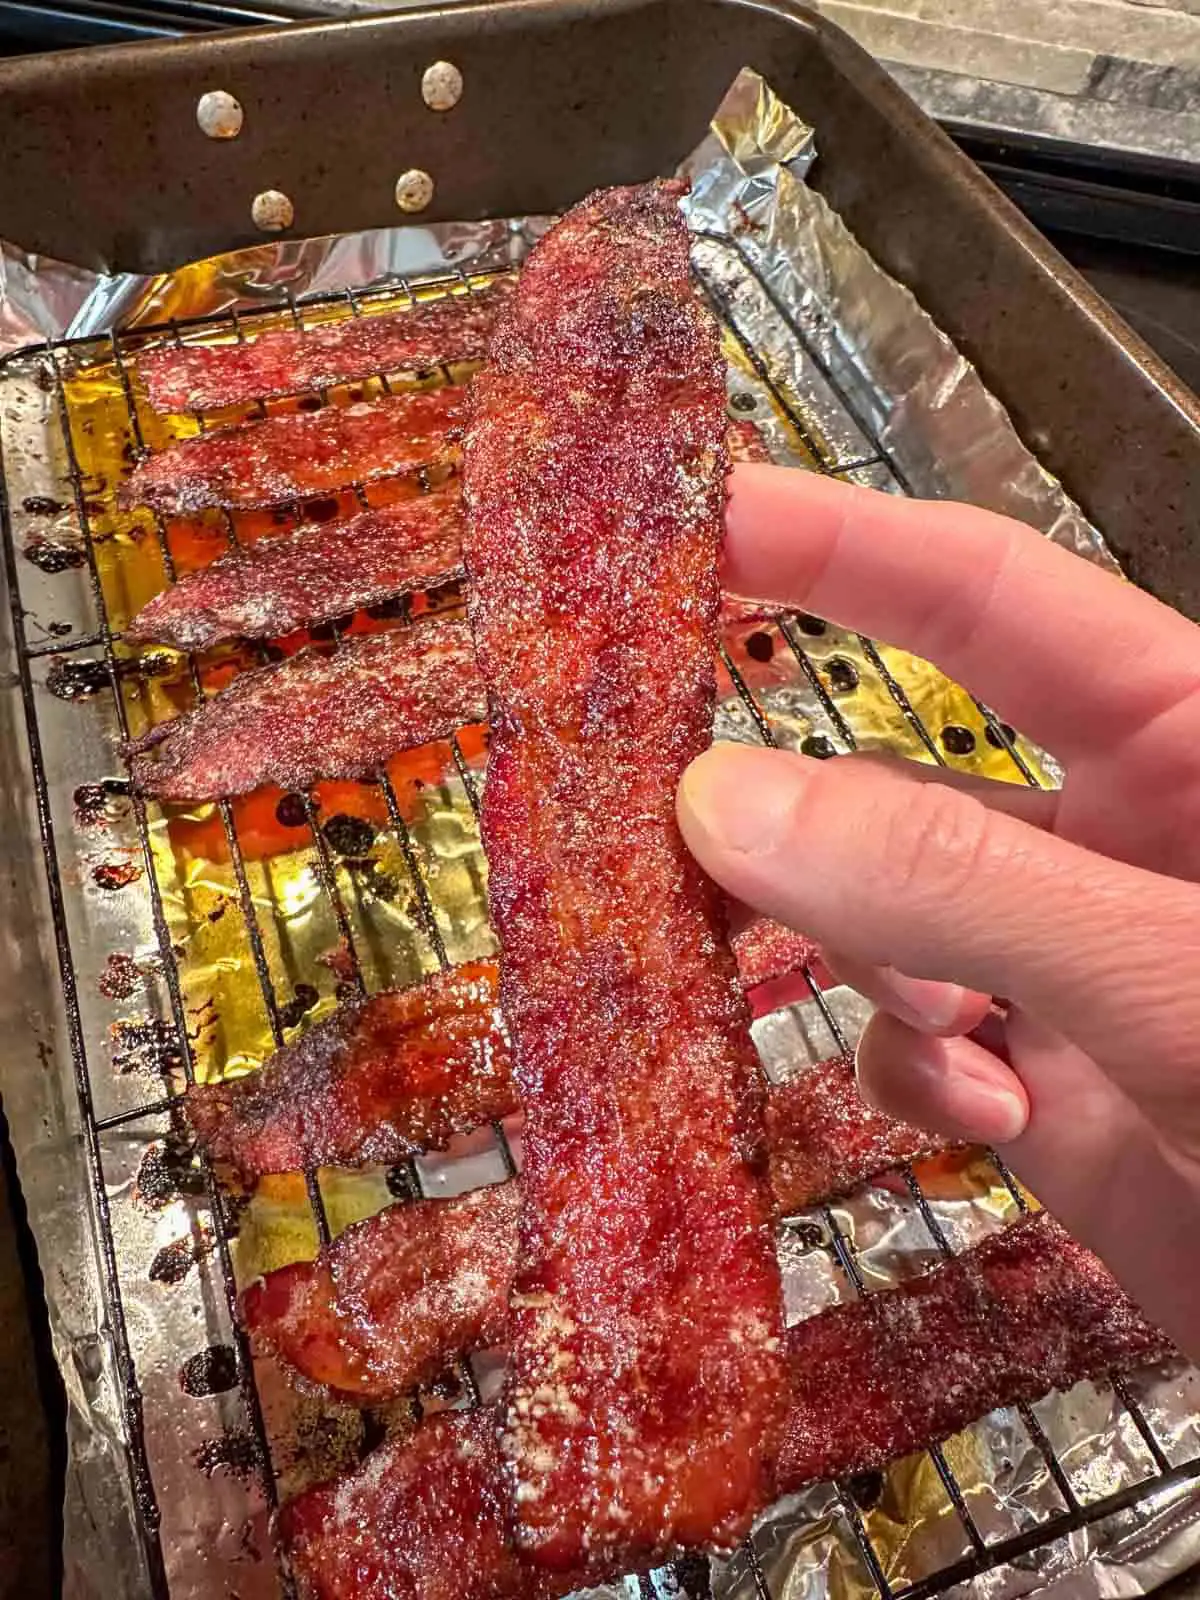 A person holding a piece of Scorpion Pepper Bacon. Behind this is a roasting tray with rack containing more Scorpion Pepper Bacon over foil with drippings underneath.